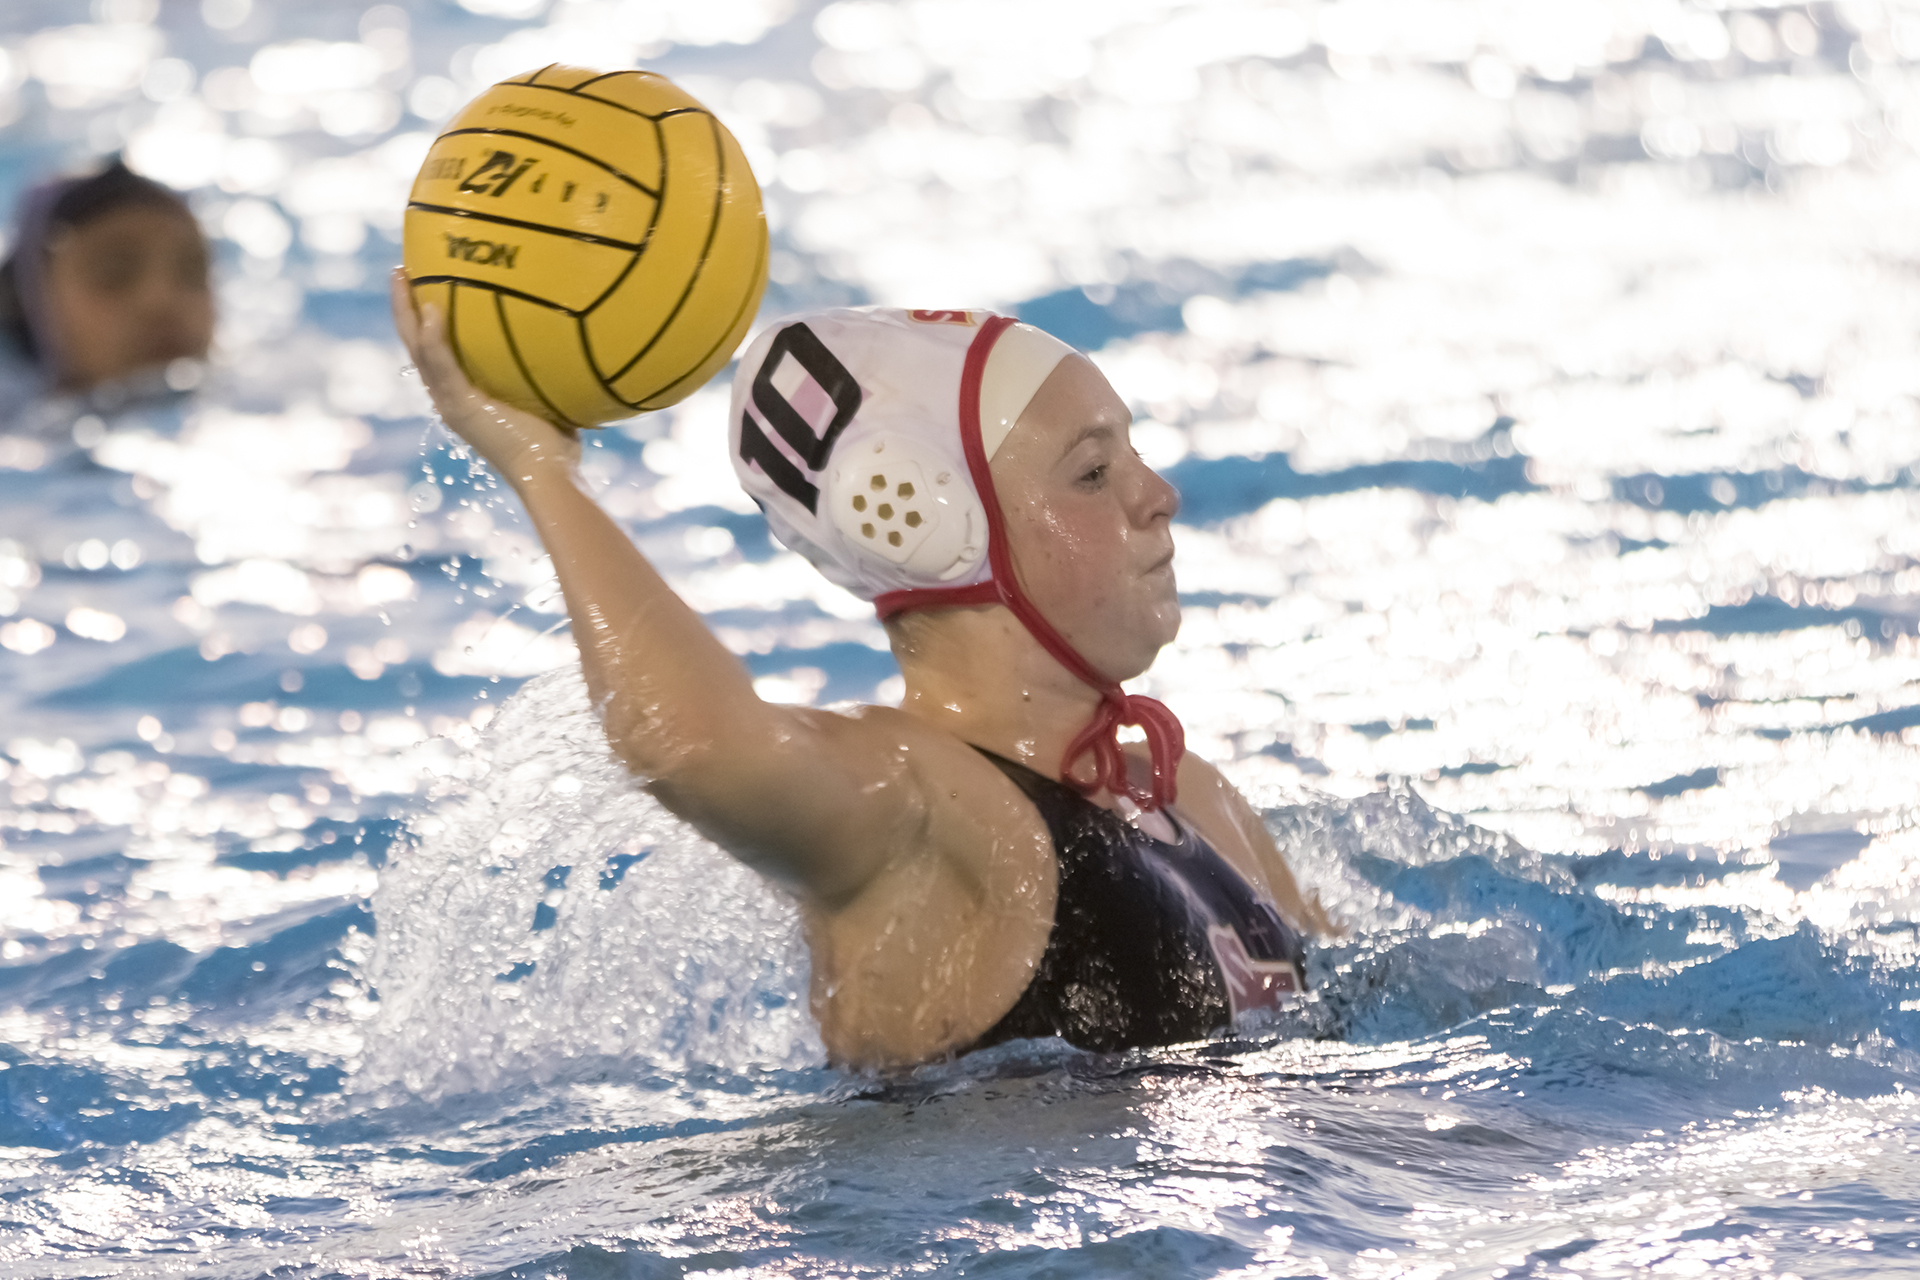 Troubies clip Rams in key section water polo matchup